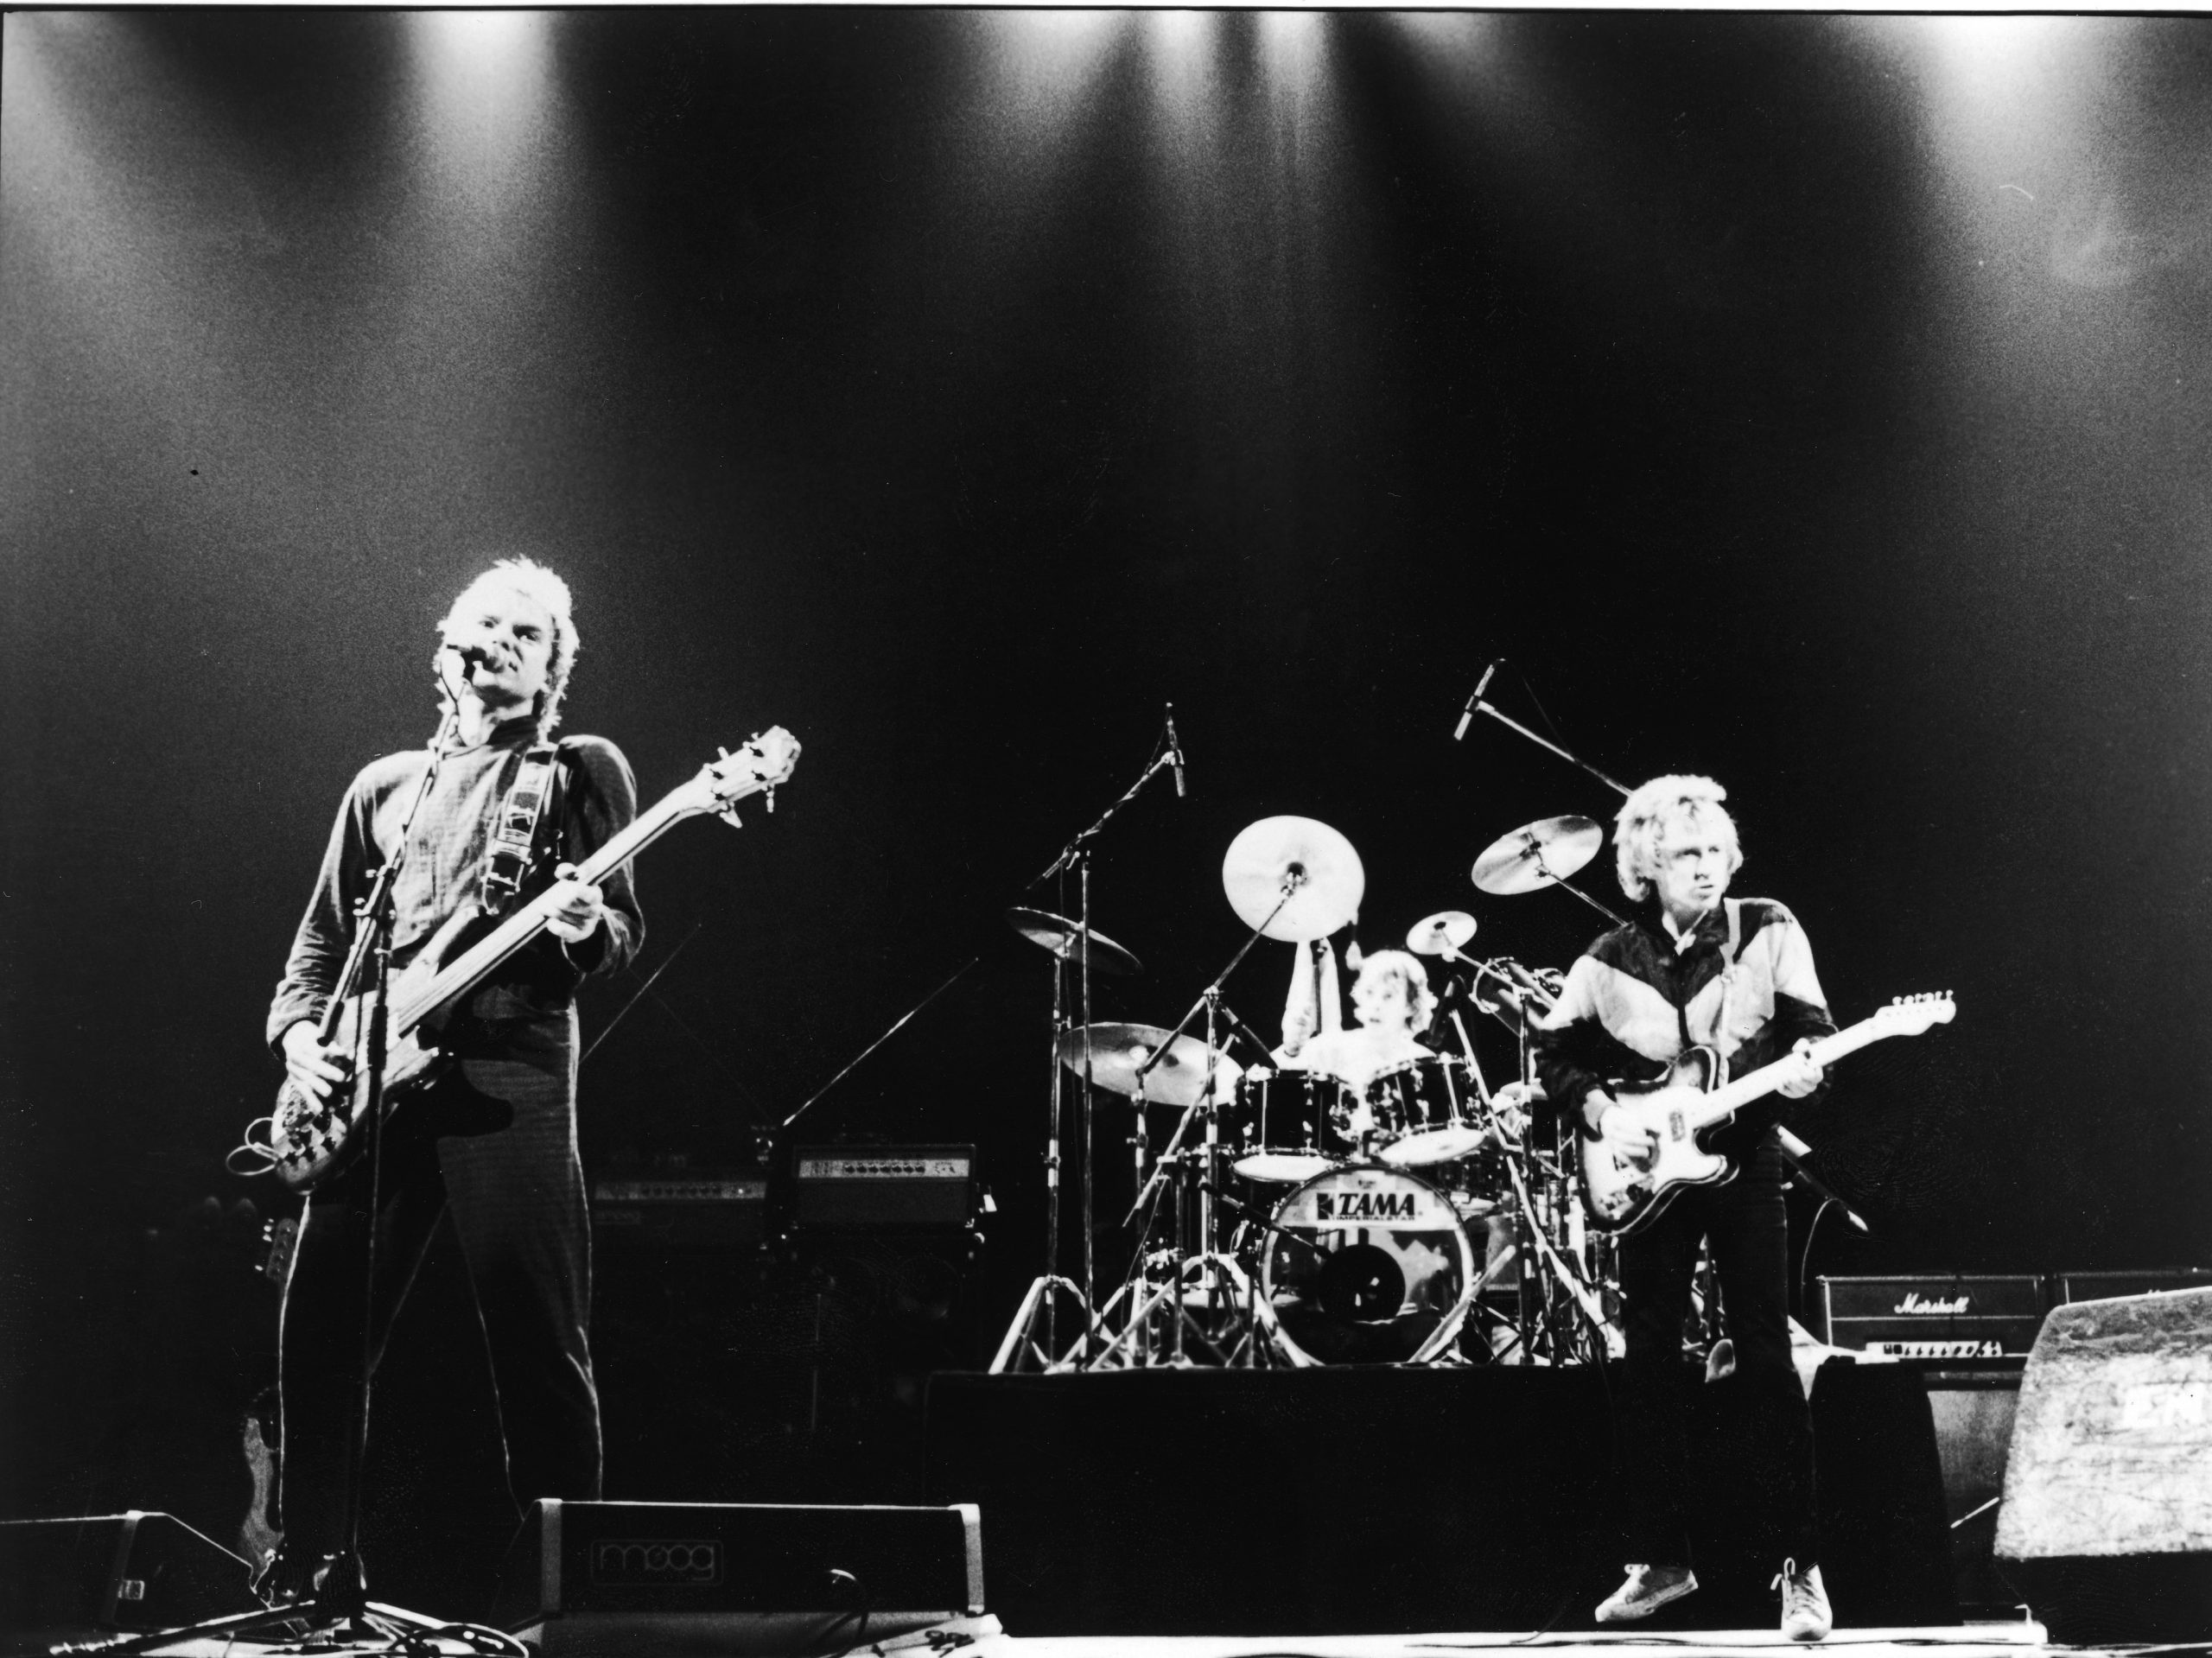 Andy Summers photo